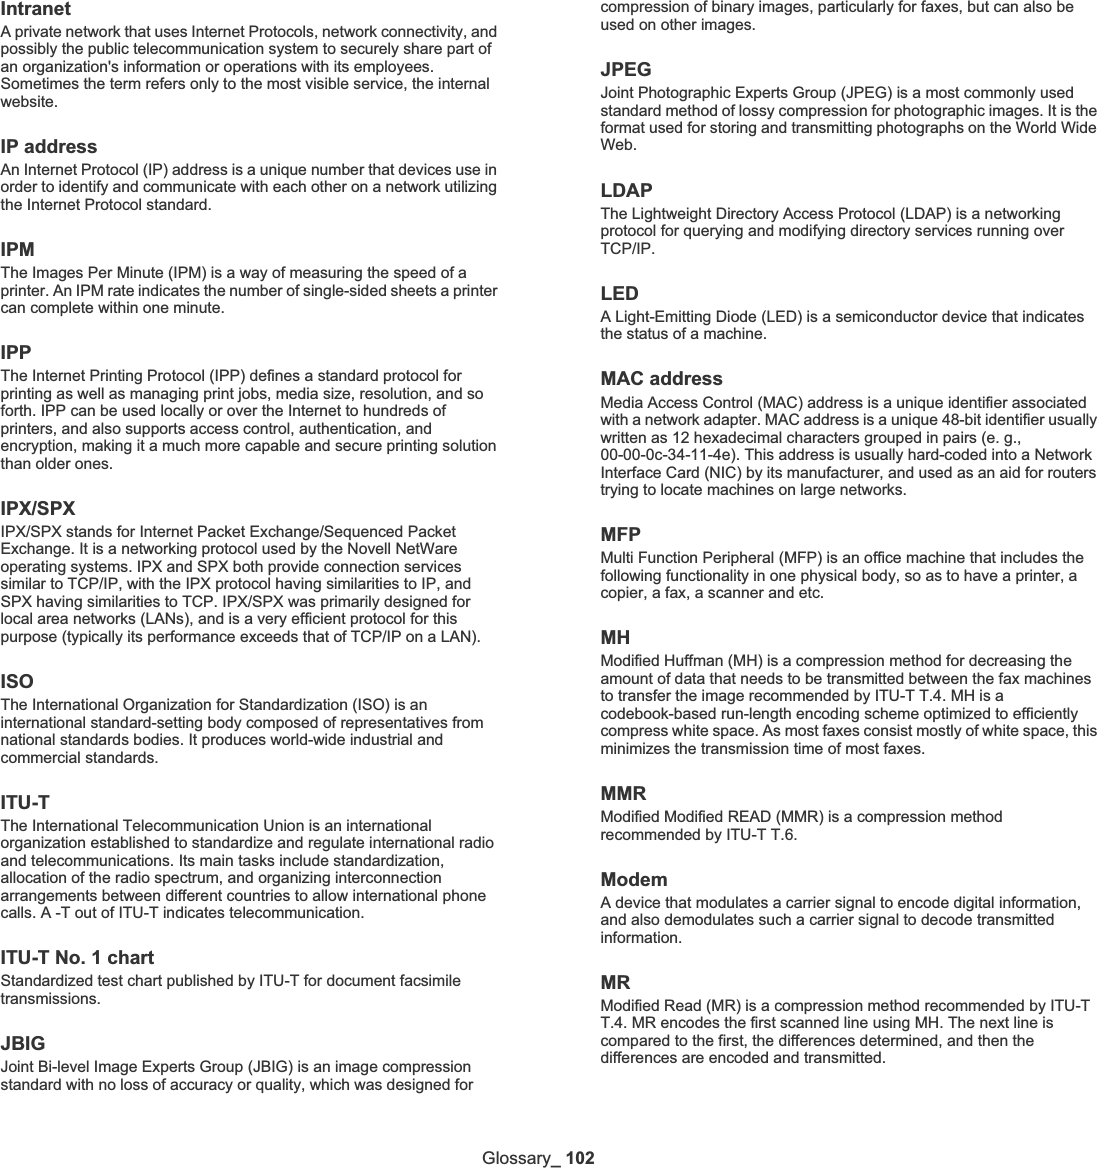 Glossary_ 102IntranetA private network that uses Internet Protocols, network connectivity, and possibly the public telecommunication system to securely share part of an organization&apos;s information or operations with its employees. Sometimes the term refers only to the most visible service, the internal website.IP addressAn Internet Protocol (IP) address is a unique number that devices use in order to identify and communicate with each other on a network utilizing the Internet Protocol standard.IPMThe Images Per Minute (IPM) is a way of measuring the speed of a printer. An IPM rate indicates the number of single-sided sheets a printer can complete within one minute.IPPThe Internet Printing Protocol (IPP) defines a standard protocol for printing as well as managing print jobs, media size, resolution, and so forth. IPP can be used locally or over the Internet to hundreds of printers, and also supports access control, authentication, and encryption, making it a much more capable and secure printing solution than older ones.IPX/SPXIPX/SPX stands for Internet Packet Exchange/Sequenced Packet Exchange. It is a networking protocol used by the Novell NetWare operating systems. IPX and SPX both provide connection services similar to TCP/IP, with the IPX protocol having similarities to IP, and SPX having similarities to TCP. IPX/SPX was primarily designed for local area networks (LANs), and is a very efficient protocol for this purpose (typically its performance exceeds that of TCP/IP on a LAN).ISOThe International Organization for Standardization (ISO) is an international standard-setting body composed of representatives from national standards bodies. It produces world-wide industrial and commercial standards.ITU-TThe International Telecommunication Union is an international organization established to standardize and regulate international radio and telecommunications. Its main tasks include standardization, allocation of the radio spectrum, and organizing interconnection arrangements between different countries to allow international phone calls. A -T out of ITU-T indicates telecommunication.ITU-T No. 1 chartStandardized test chart published by ITU-T for document facsimile transmissions.JBIGJoint Bi-level Image Experts Group (JBIG) is an image compression standard with no loss of accuracy or quality, which was designed for compression of binary images, particularly for faxes, but can also be used on other images.JPEGJoint Photographic Experts Group (JPEG) is a most commonly used standard method of lossy compression for photographic images. It is the format used for storing and transmitting photographs on the World Wide Web.LDAPThe Lightweight Directory Access Protocol (LDAP) is a networking protocol for querying and modifying directory services running over TCP/IP.LEDA Light-Emitting Diode (LED) is a semiconductor device that indicates the status of a machine.  MAC addressMedia Access Control (MAC) address is a unique identifier associated with a network adapter. MAC address is a unique 48-bit identifier usually written as 12 hexadecimal characters grouped in pairs (e. g., 00-00-0c-34-11-4e). This address is usually hard-coded into a Network Interface Card (NIC) by its manufacturer, and used as an aid for routers trying to locate machines on large networks.MFPMulti Function Peripheral (MFP) is an office machine that includes the following functionality in one physical body, so as to have a printer, a copier, a fax, a scanner and etc.MHModified Huffman (MH) is a compression method for decreasing the amount of data that needs to be transmitted between the fax machines to transfer the image recommended by ITU-T T.4. MH is a codebook-based run-length encoding scheme optimized to efficiently compress white space. As most faxes consist mostly of white space, this minimizes the transmission time of most faxes. MMRModified Modified READ (MMR) is a compression method recommended by ITU-T T.6.ModemA device that modulates a carrier signal to encode digital information, and also demodulates such a carrier signal to decode transmitted information.MRModified Read (MR) is a compression method recommended by ITU-T T.4. MR encodes the first scanned line using MH. The next line is compared to the first, the differences determined, and then the differences are encoded and transmitted.